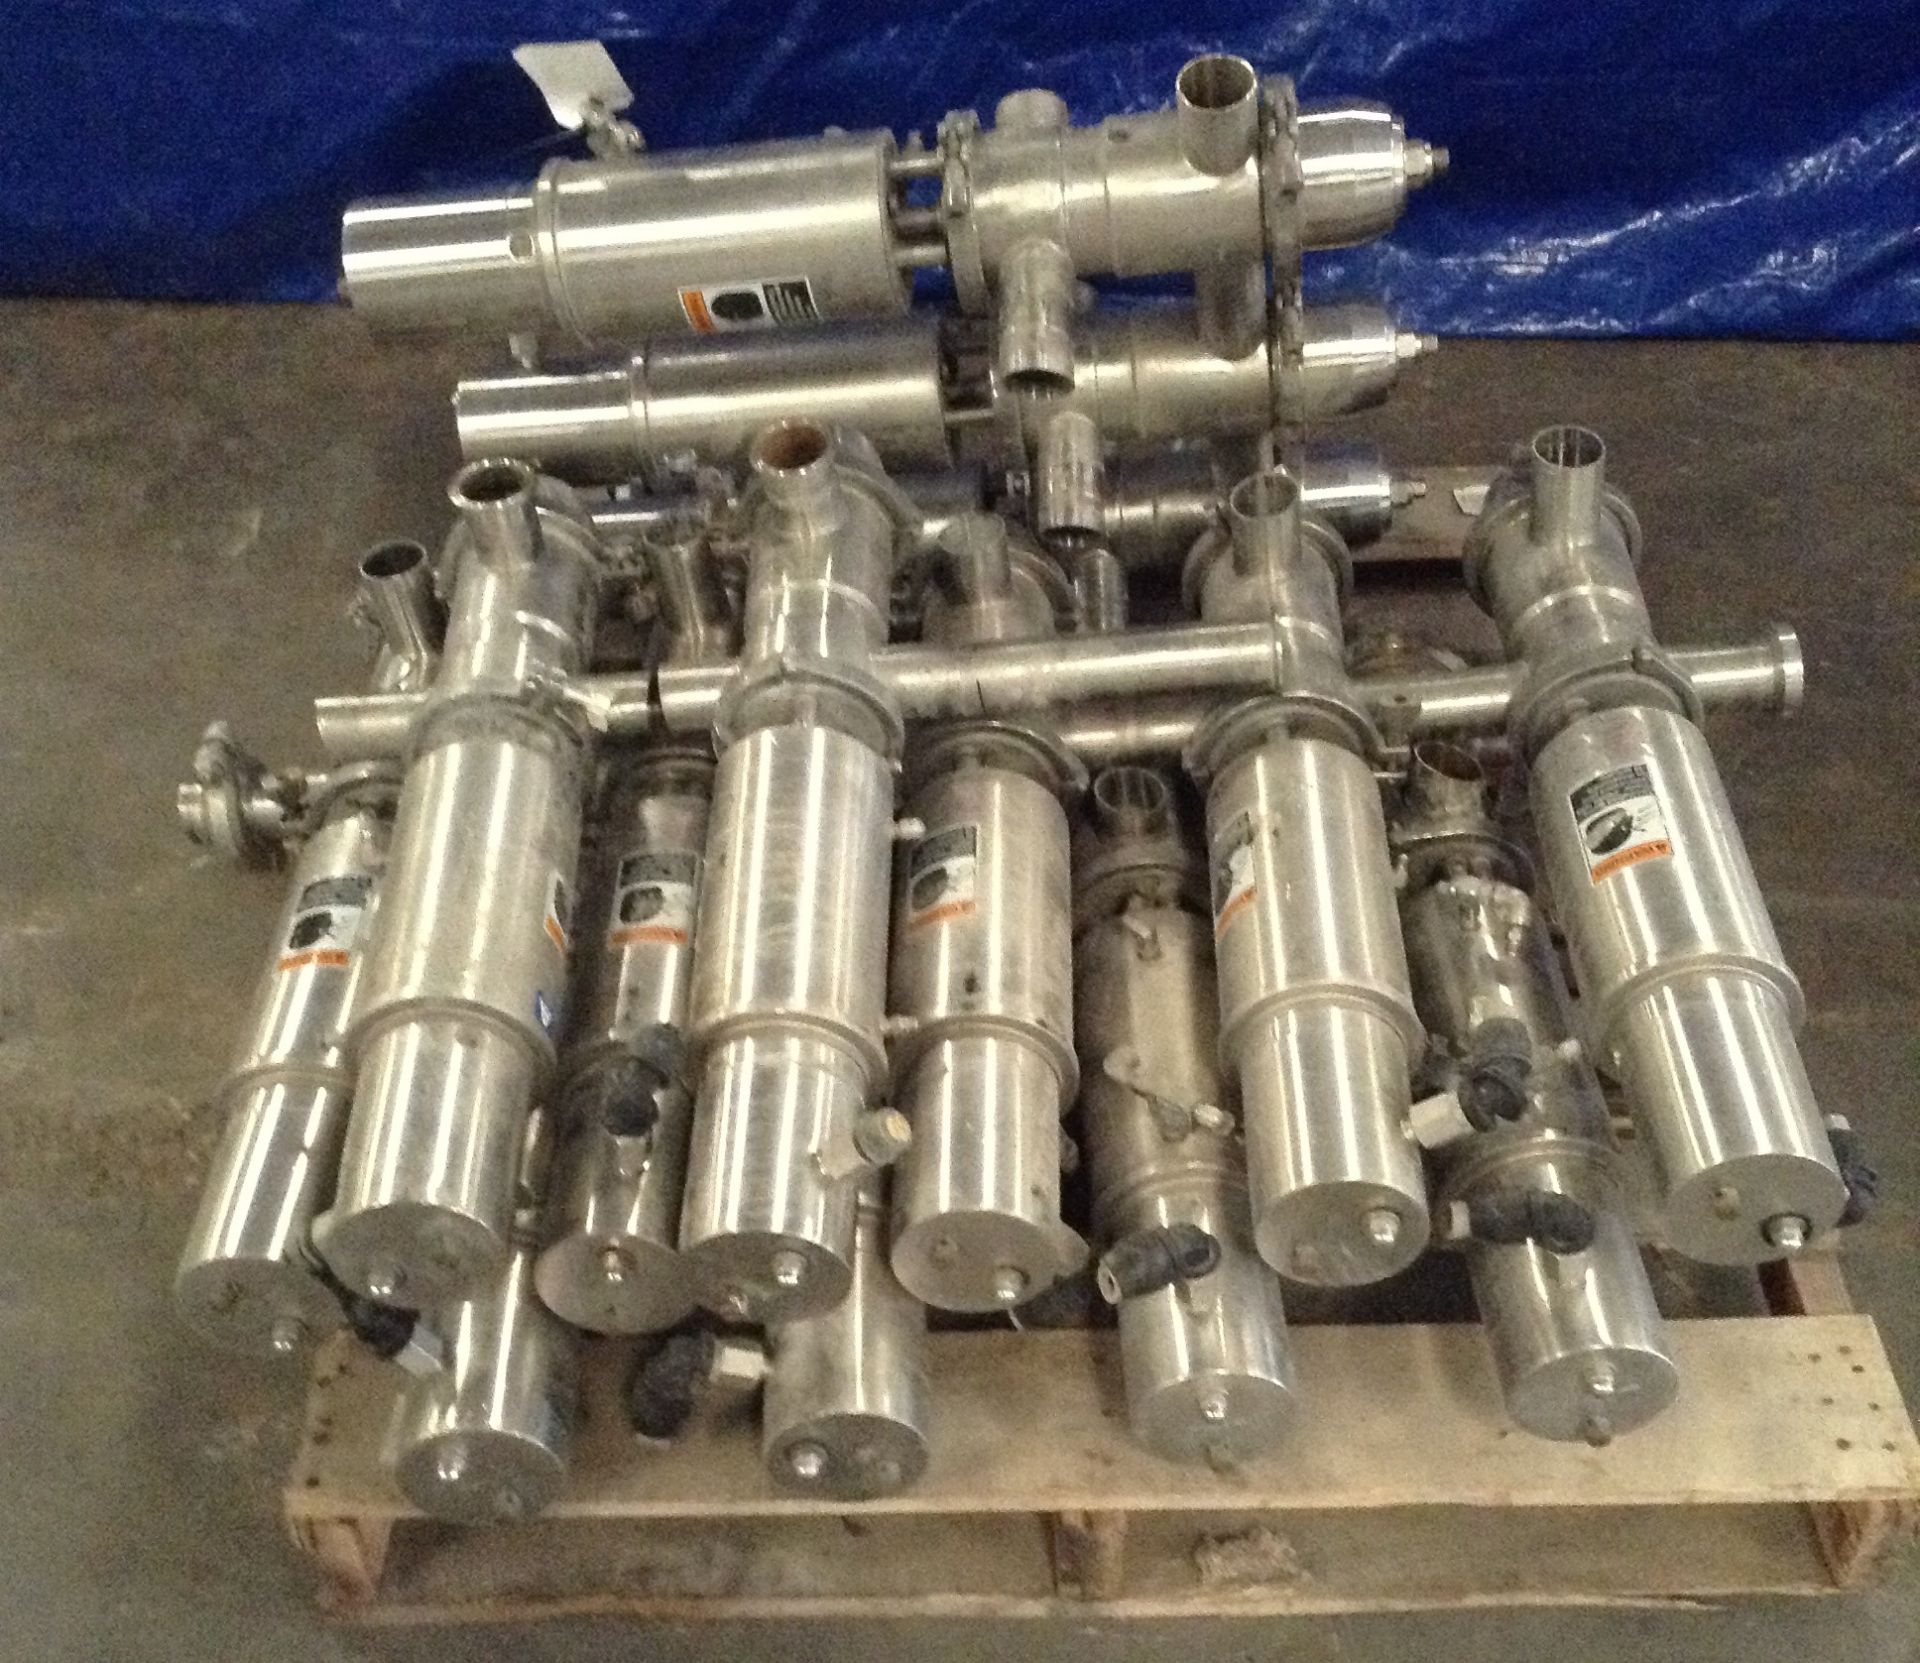 Lot of 14 each 2” product valves